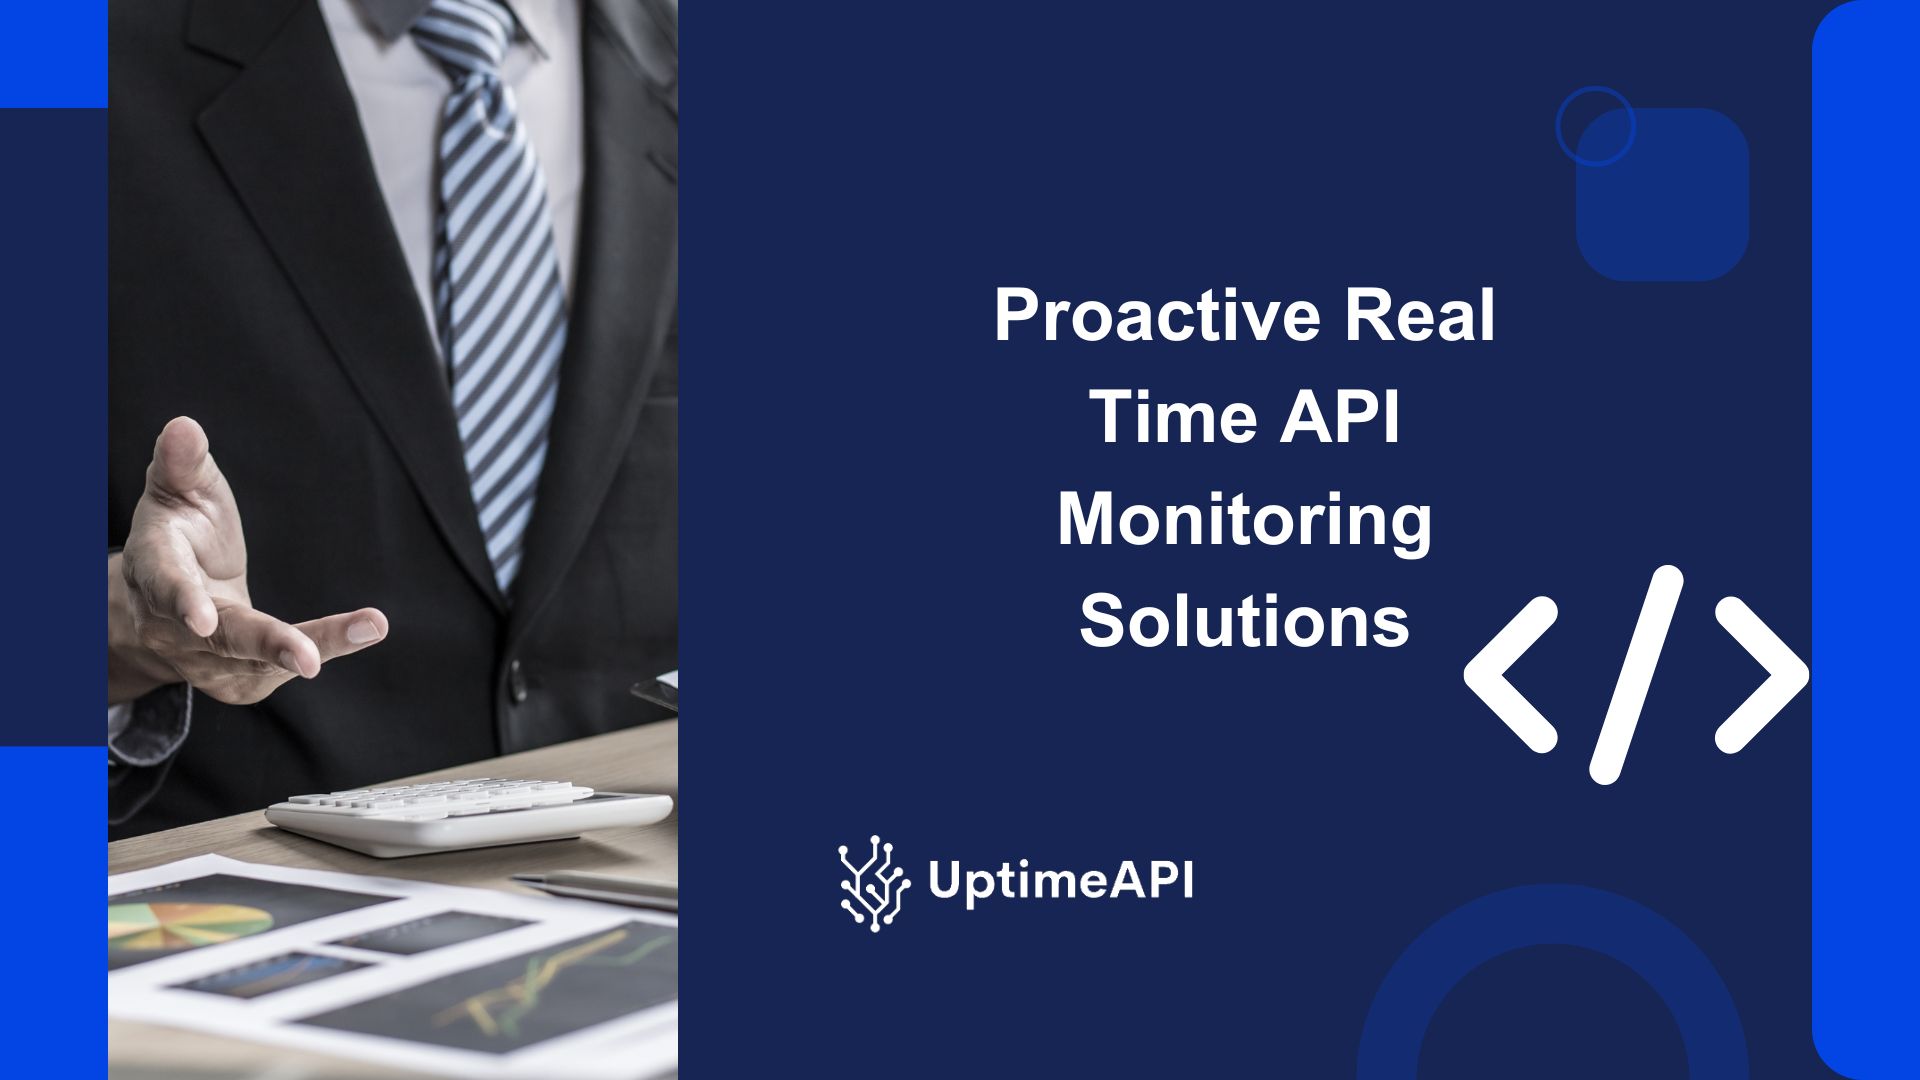 Proactive Real Time API Monitoring Solutions